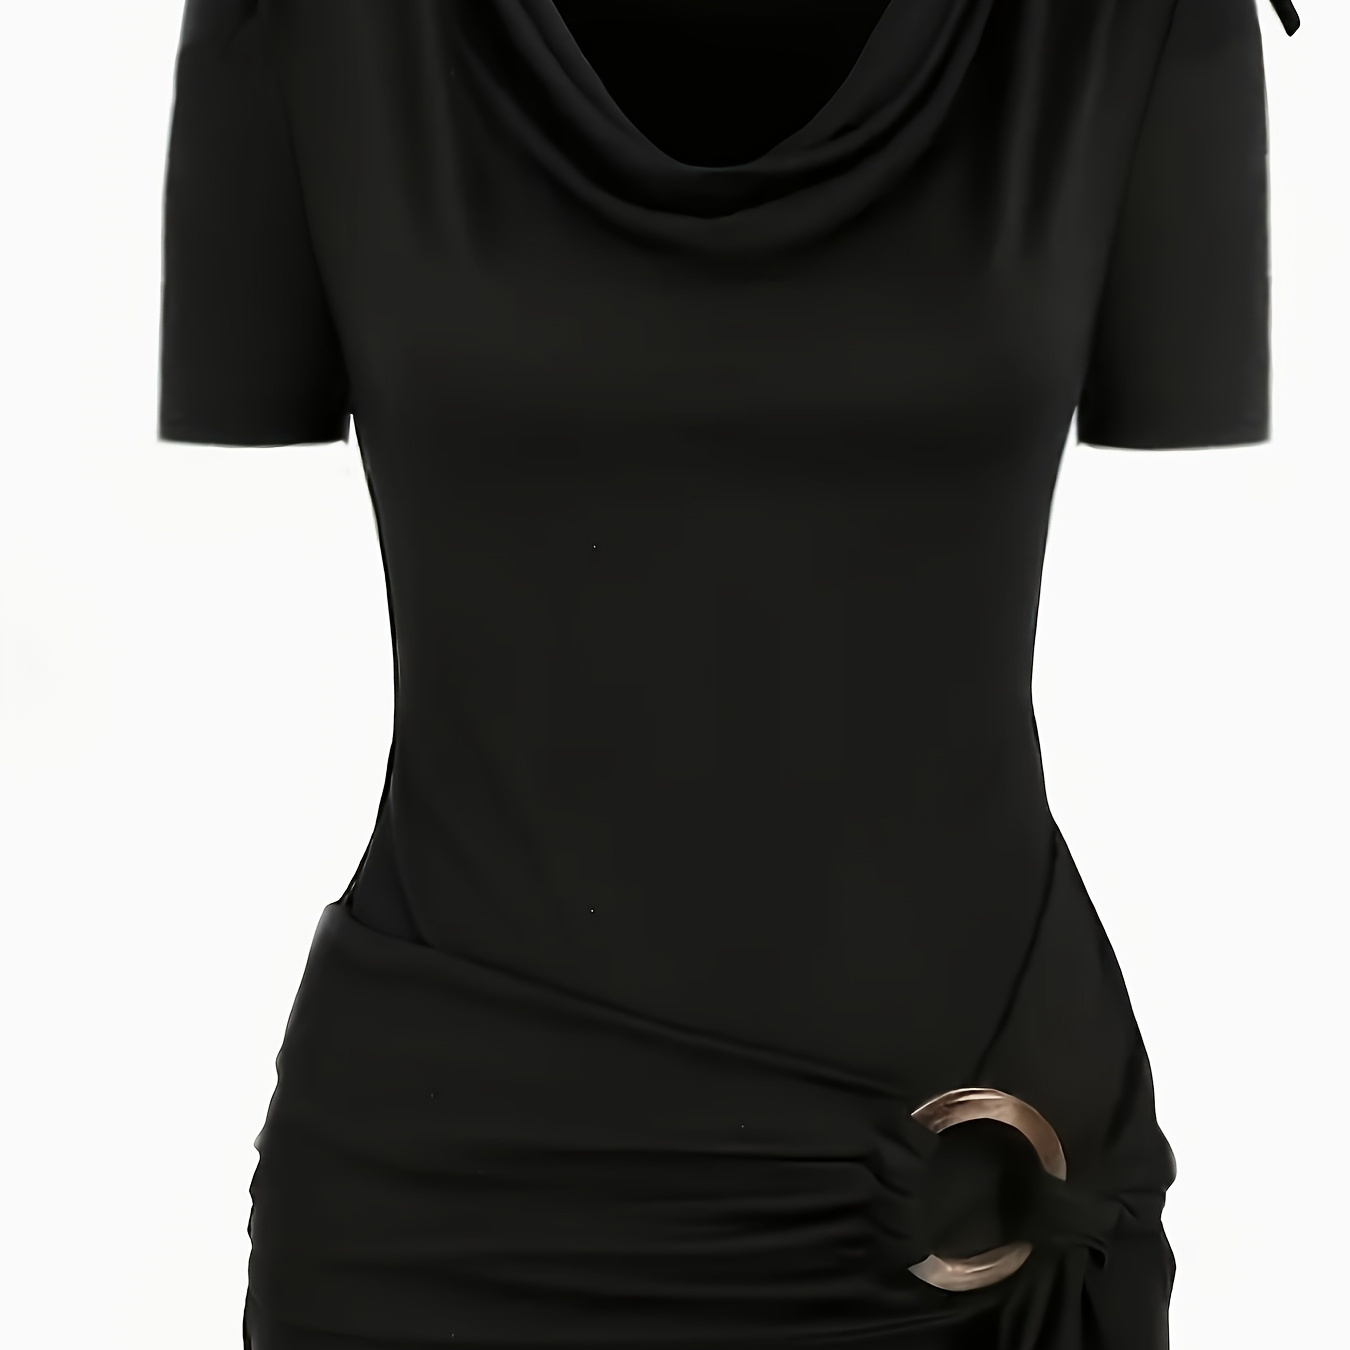 

Ring Decor Cowl Neck T-shirt, Casual Short Sleeve Slim Top For Spring & Summer, Women's Clothing